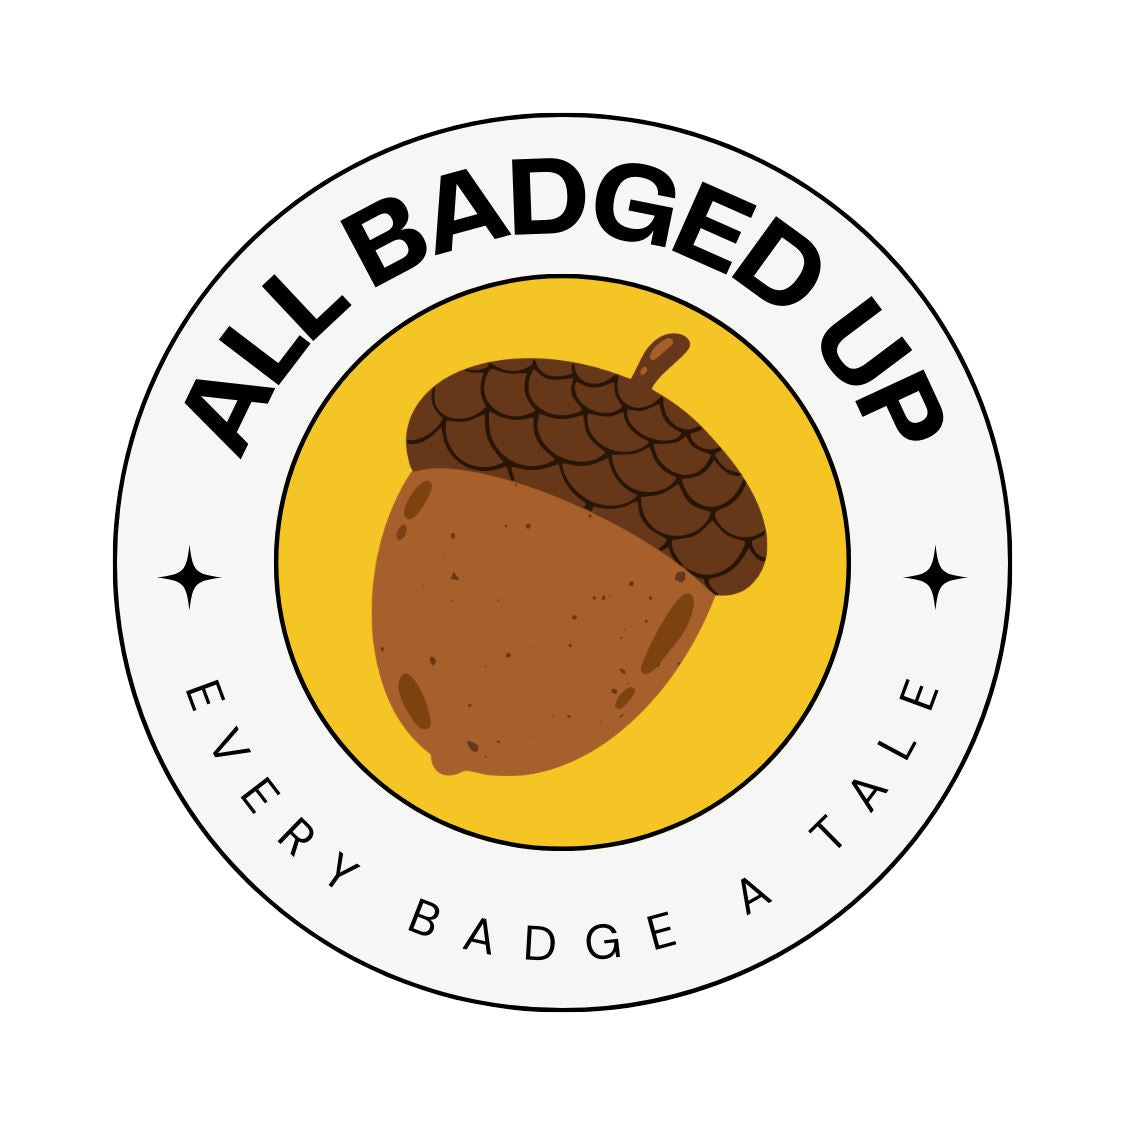 ALL BADGED UP ALL BADGE UP Great Functional Goods 